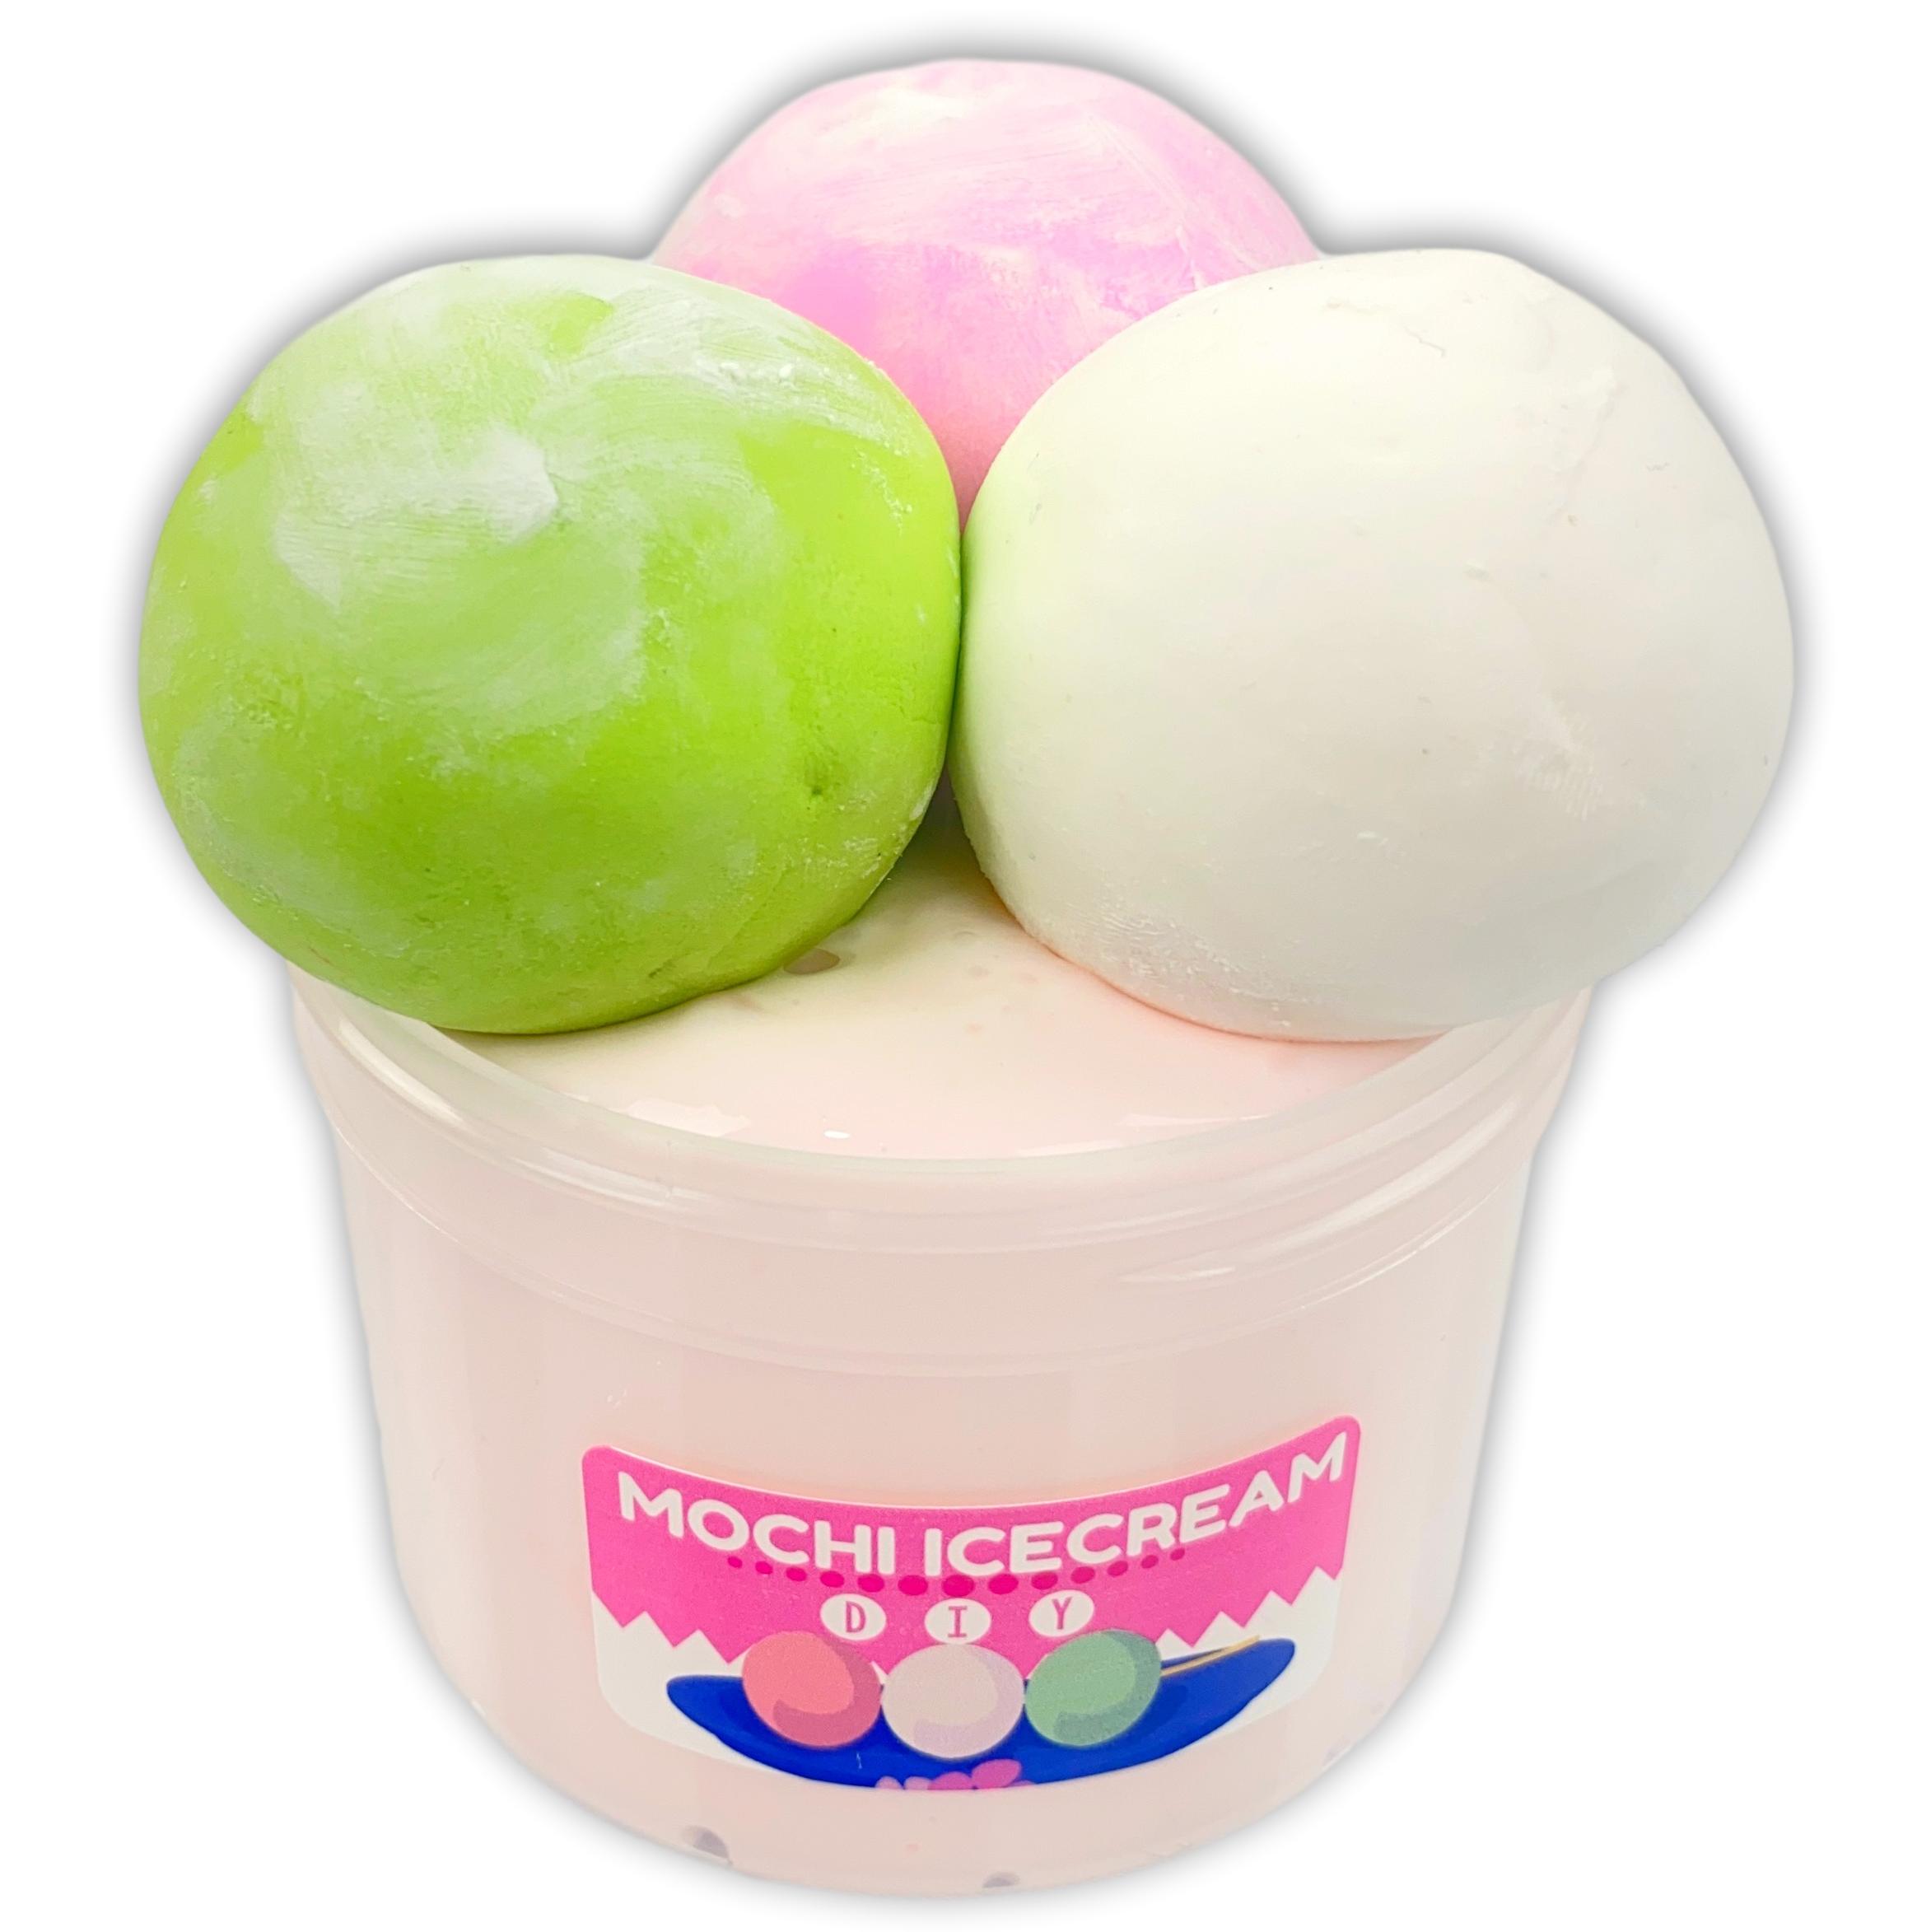 Wholesale DIY Mochi Ice Cream Kit for your store - Faire